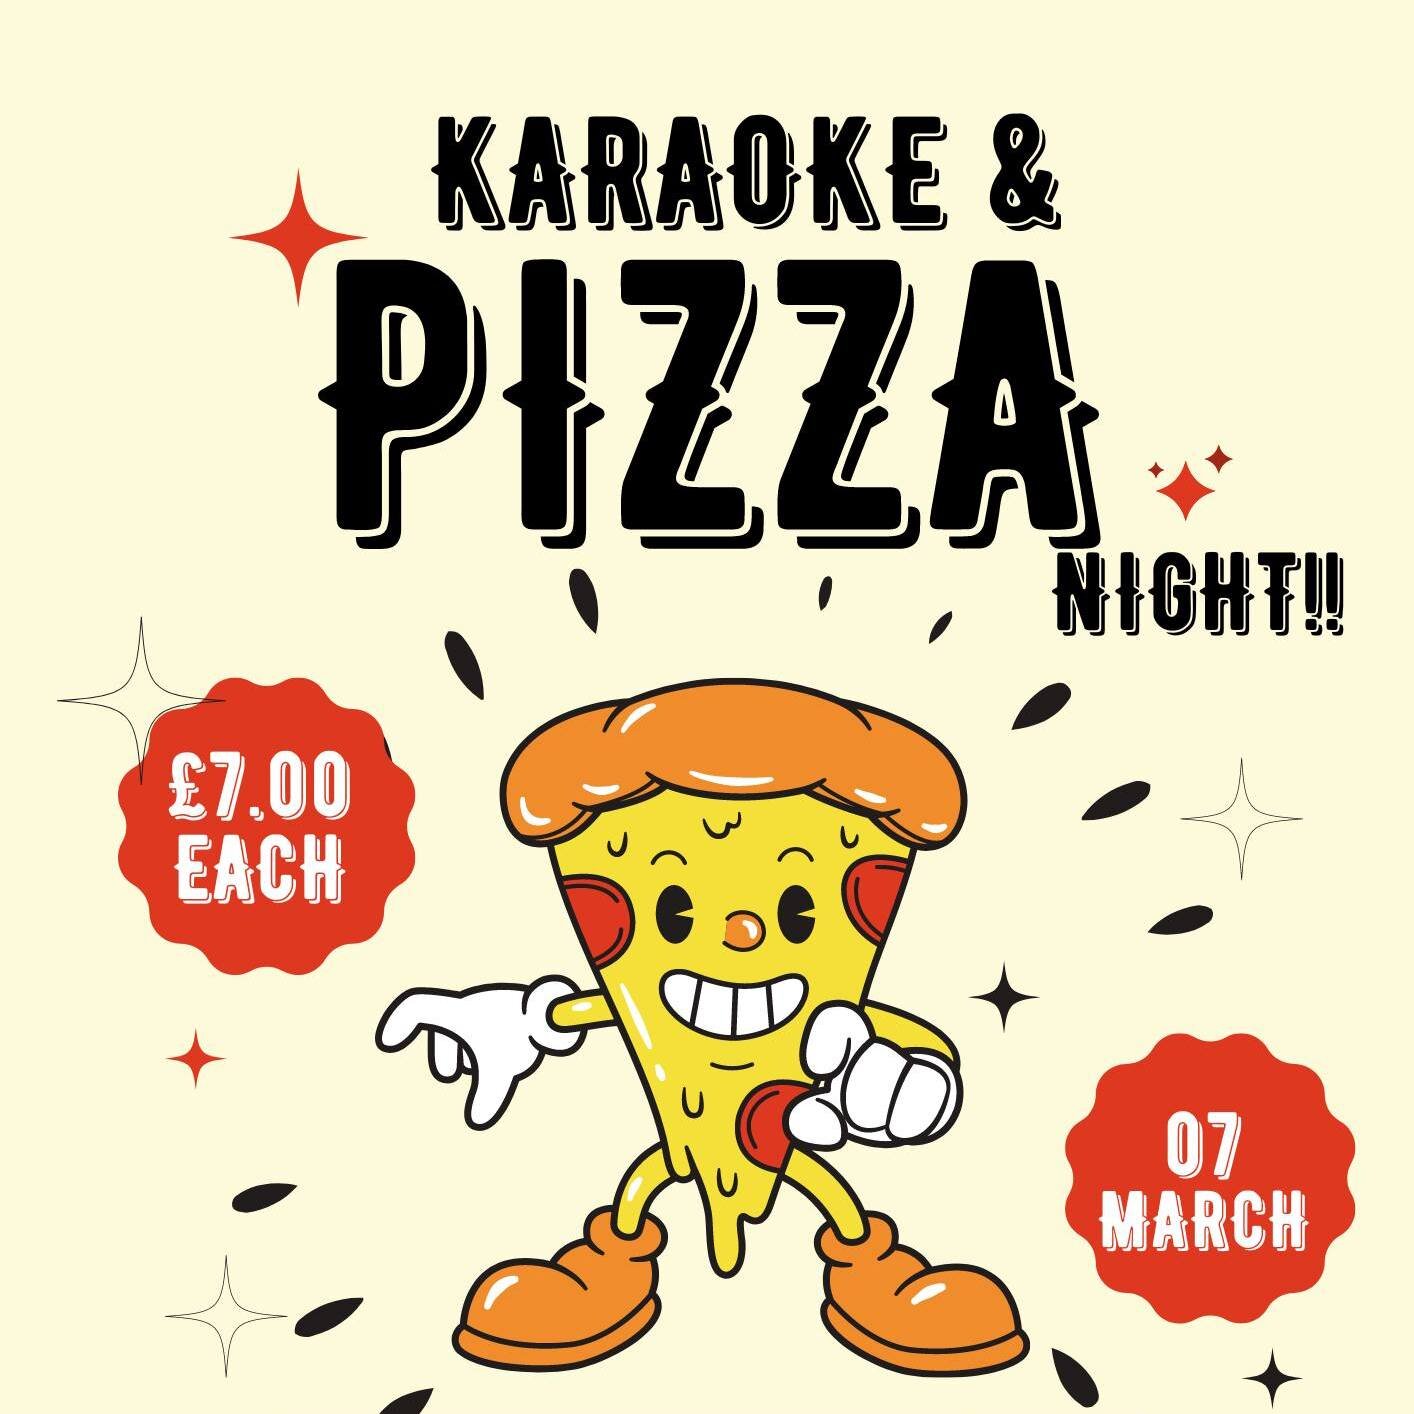 Pizza and Karaoke Night on Thursday 07th March!🍕👨&zwj;🎤
Event location: Oxford School of English
Time: 18:00 (Before Pub Night!) 

Please see Reception for further information and to sign up!

 #internationallanguage #studywithus #internationalstu